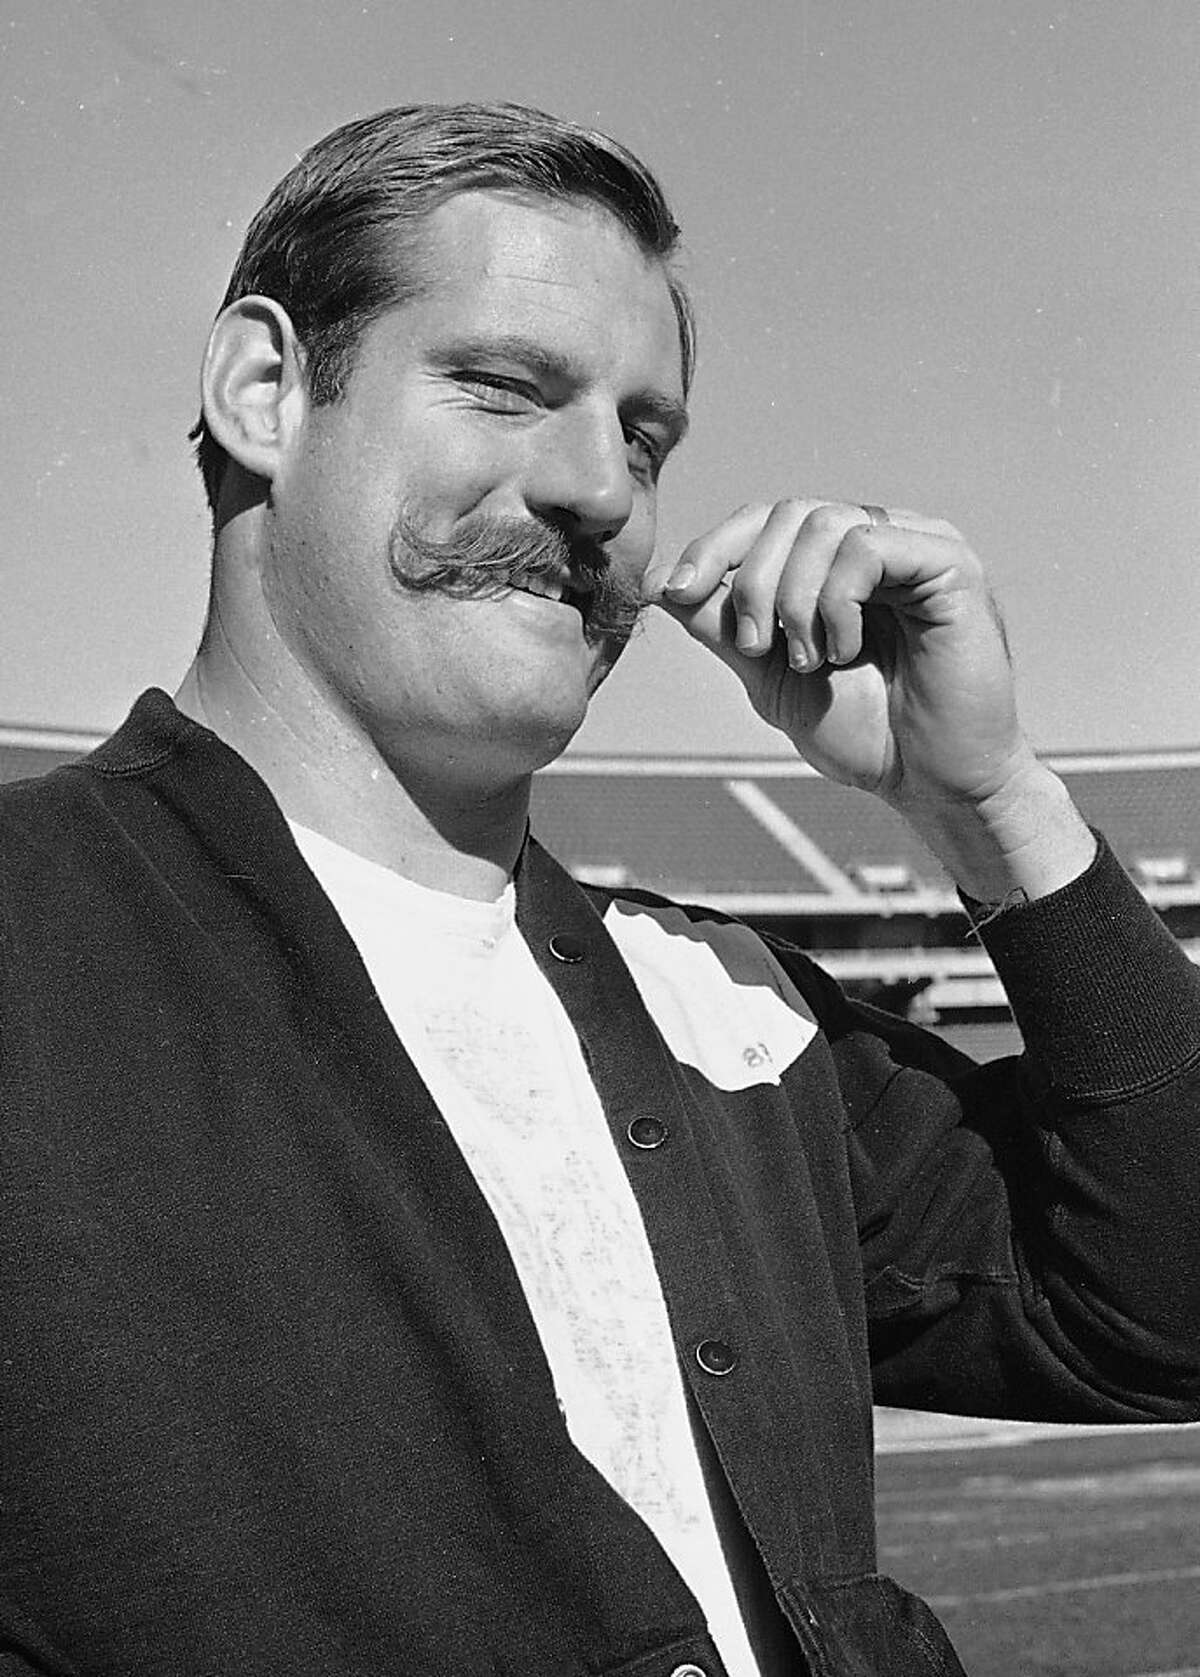 FILE - In this Jan. 3, 1968, file photo, Oakland Raiders defensive end Ben Davidson twirls his handlebar moustache in Oakland, Calif., as he contemplated the coming meeting with the Green Bay Packers in the NFL championship game. Davidson, the hulking defensive end who starred for the Raiders in the 1960s before becoming a famous television pitch man, died Monday night, July 2, 2012. He was 72. (AP Photo/Ernest Bennett)